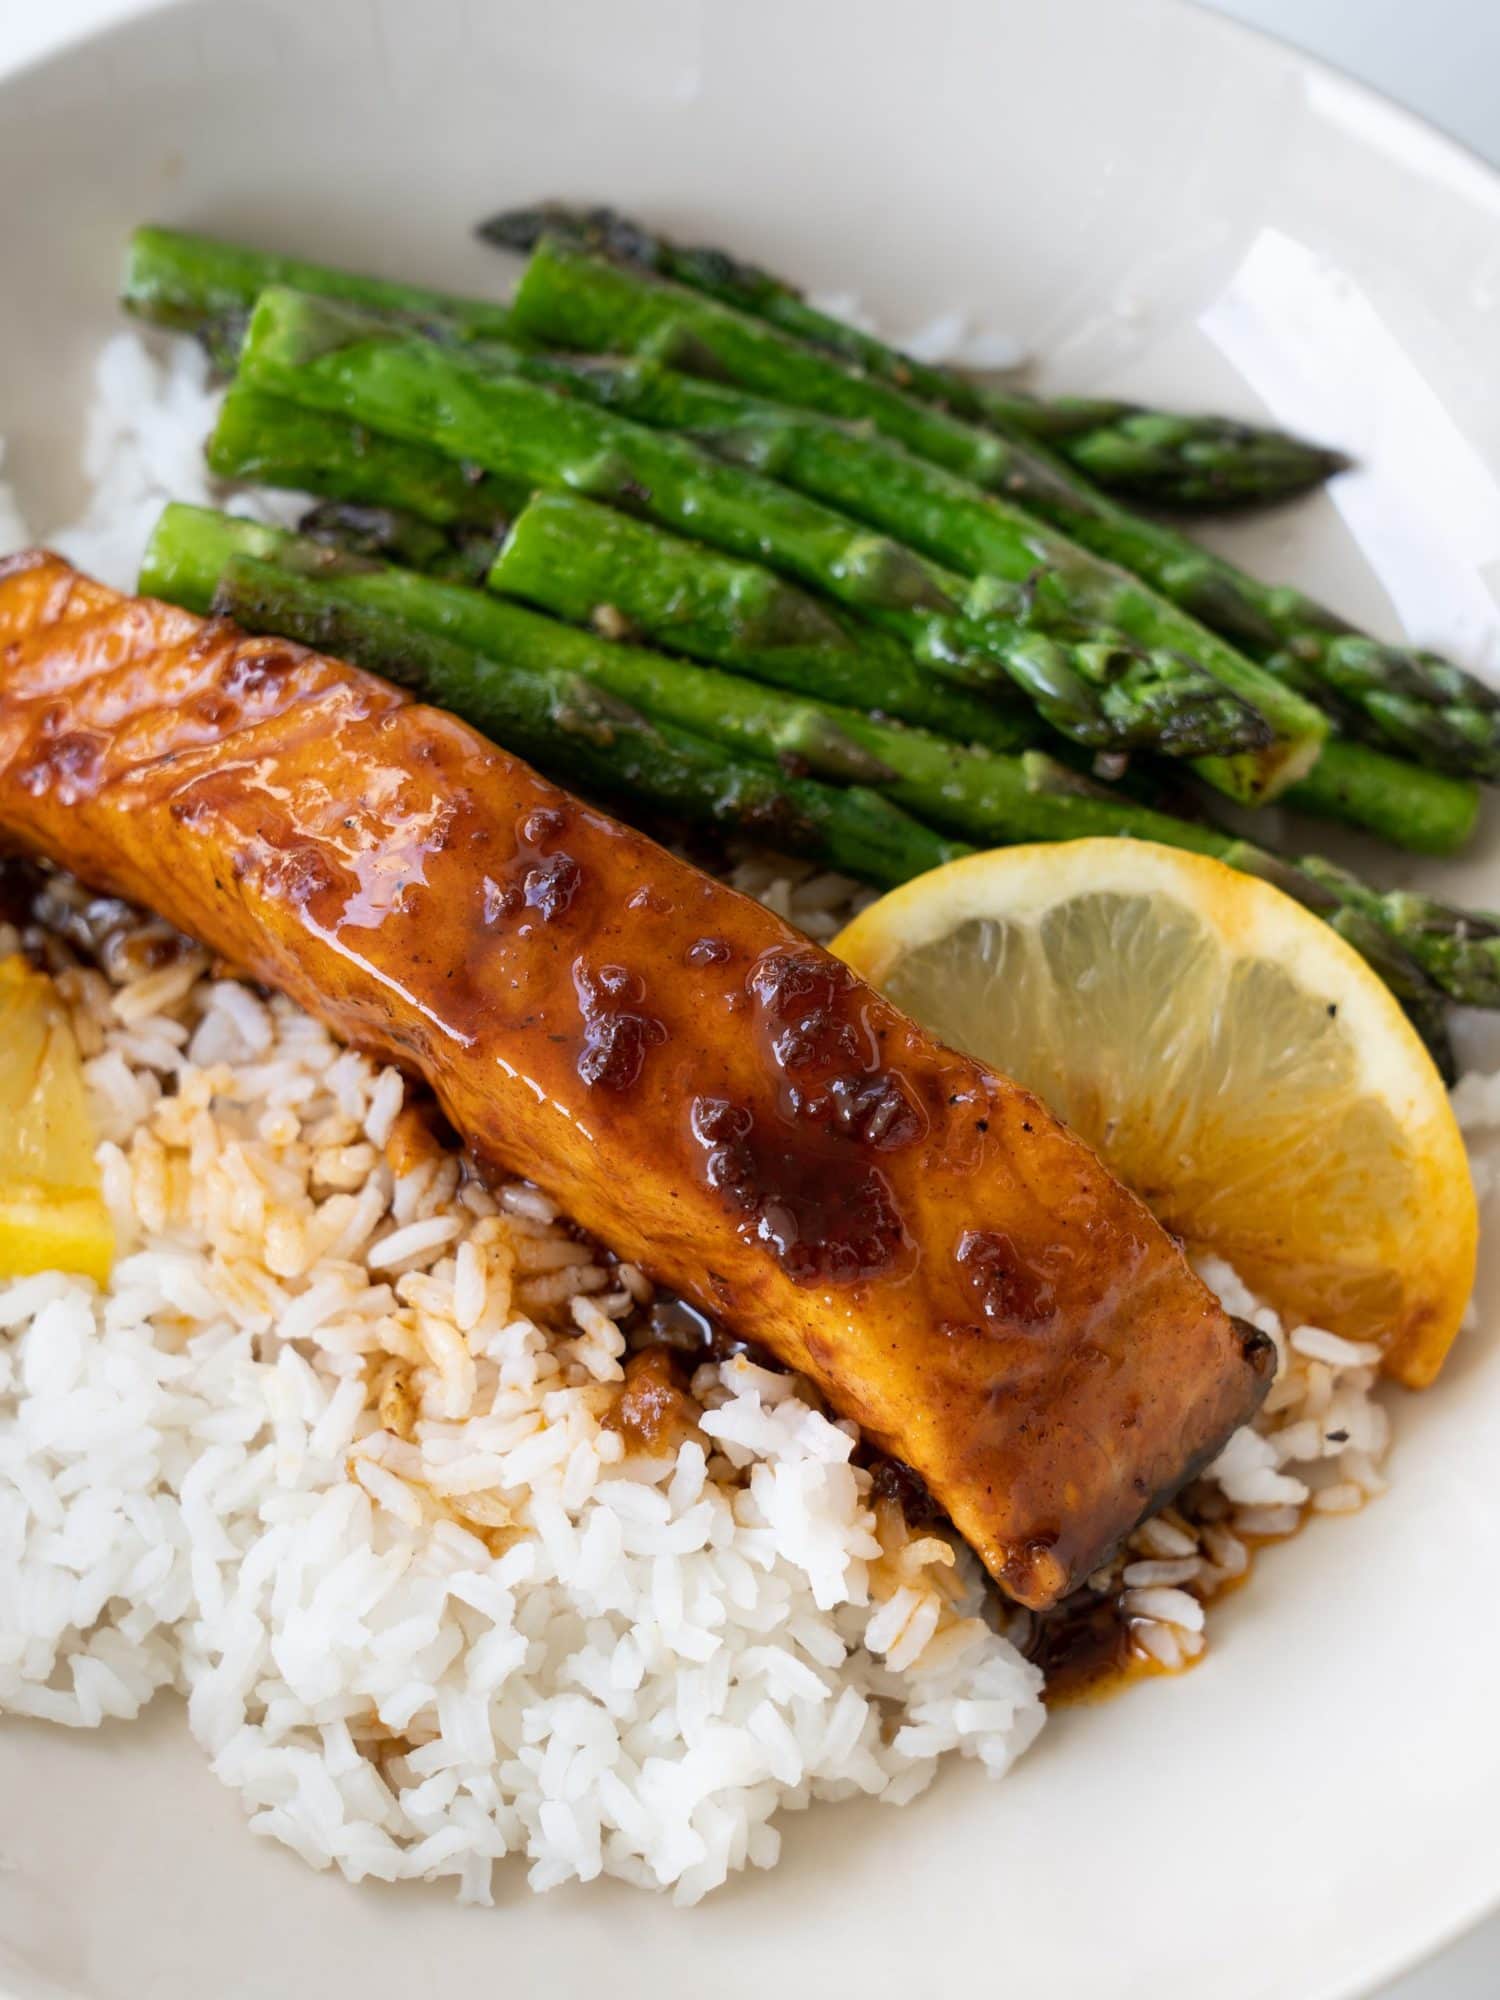 Sticky, sweet, and lemony, this Lemon Honey Glazed Salmon is incredibly delicious. You can make a Salmon Rice bowl with this easy 20 mins recipe and your dinner is sorted.